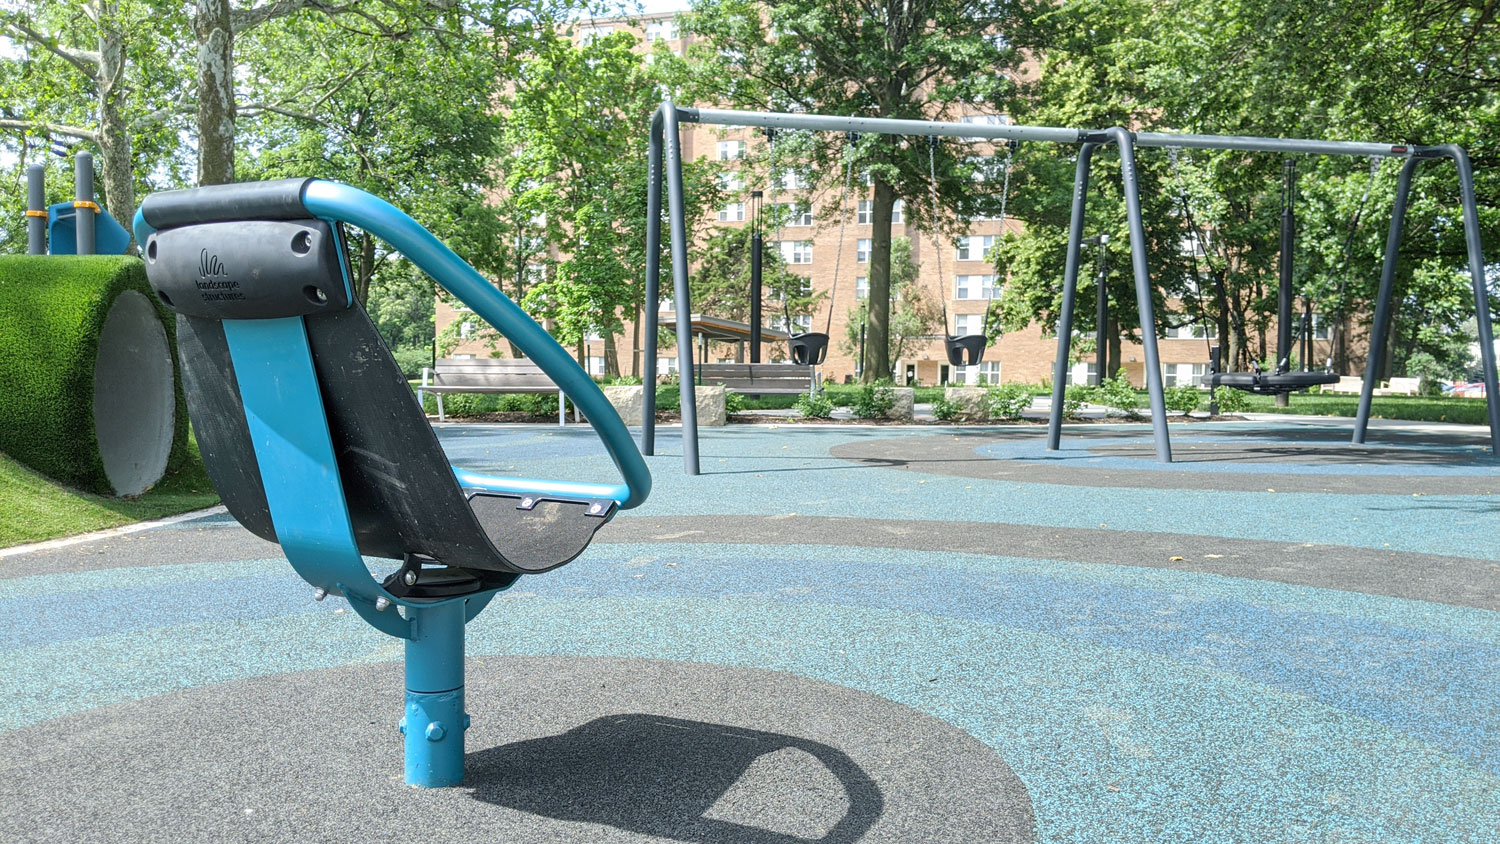 This is an image of downtown overland park thompson park playground spinner swing web